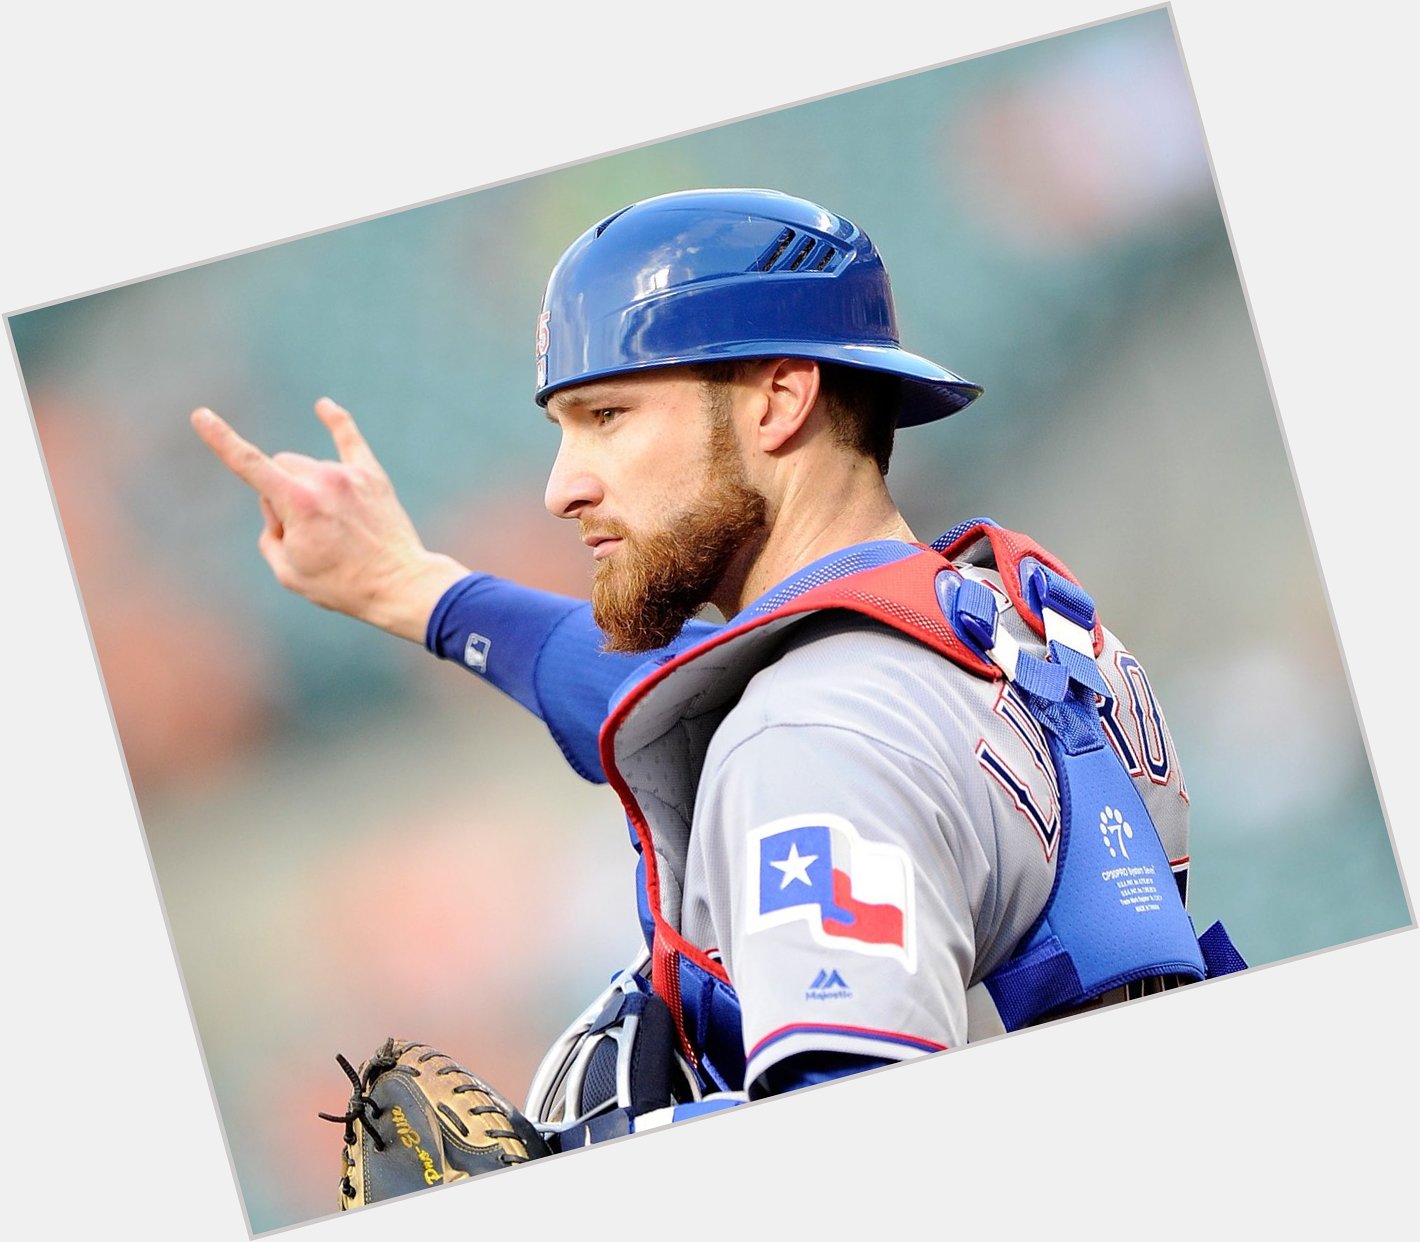 In addition, Happy 31st Birthday to catcher, Jonathan Lucroy!  